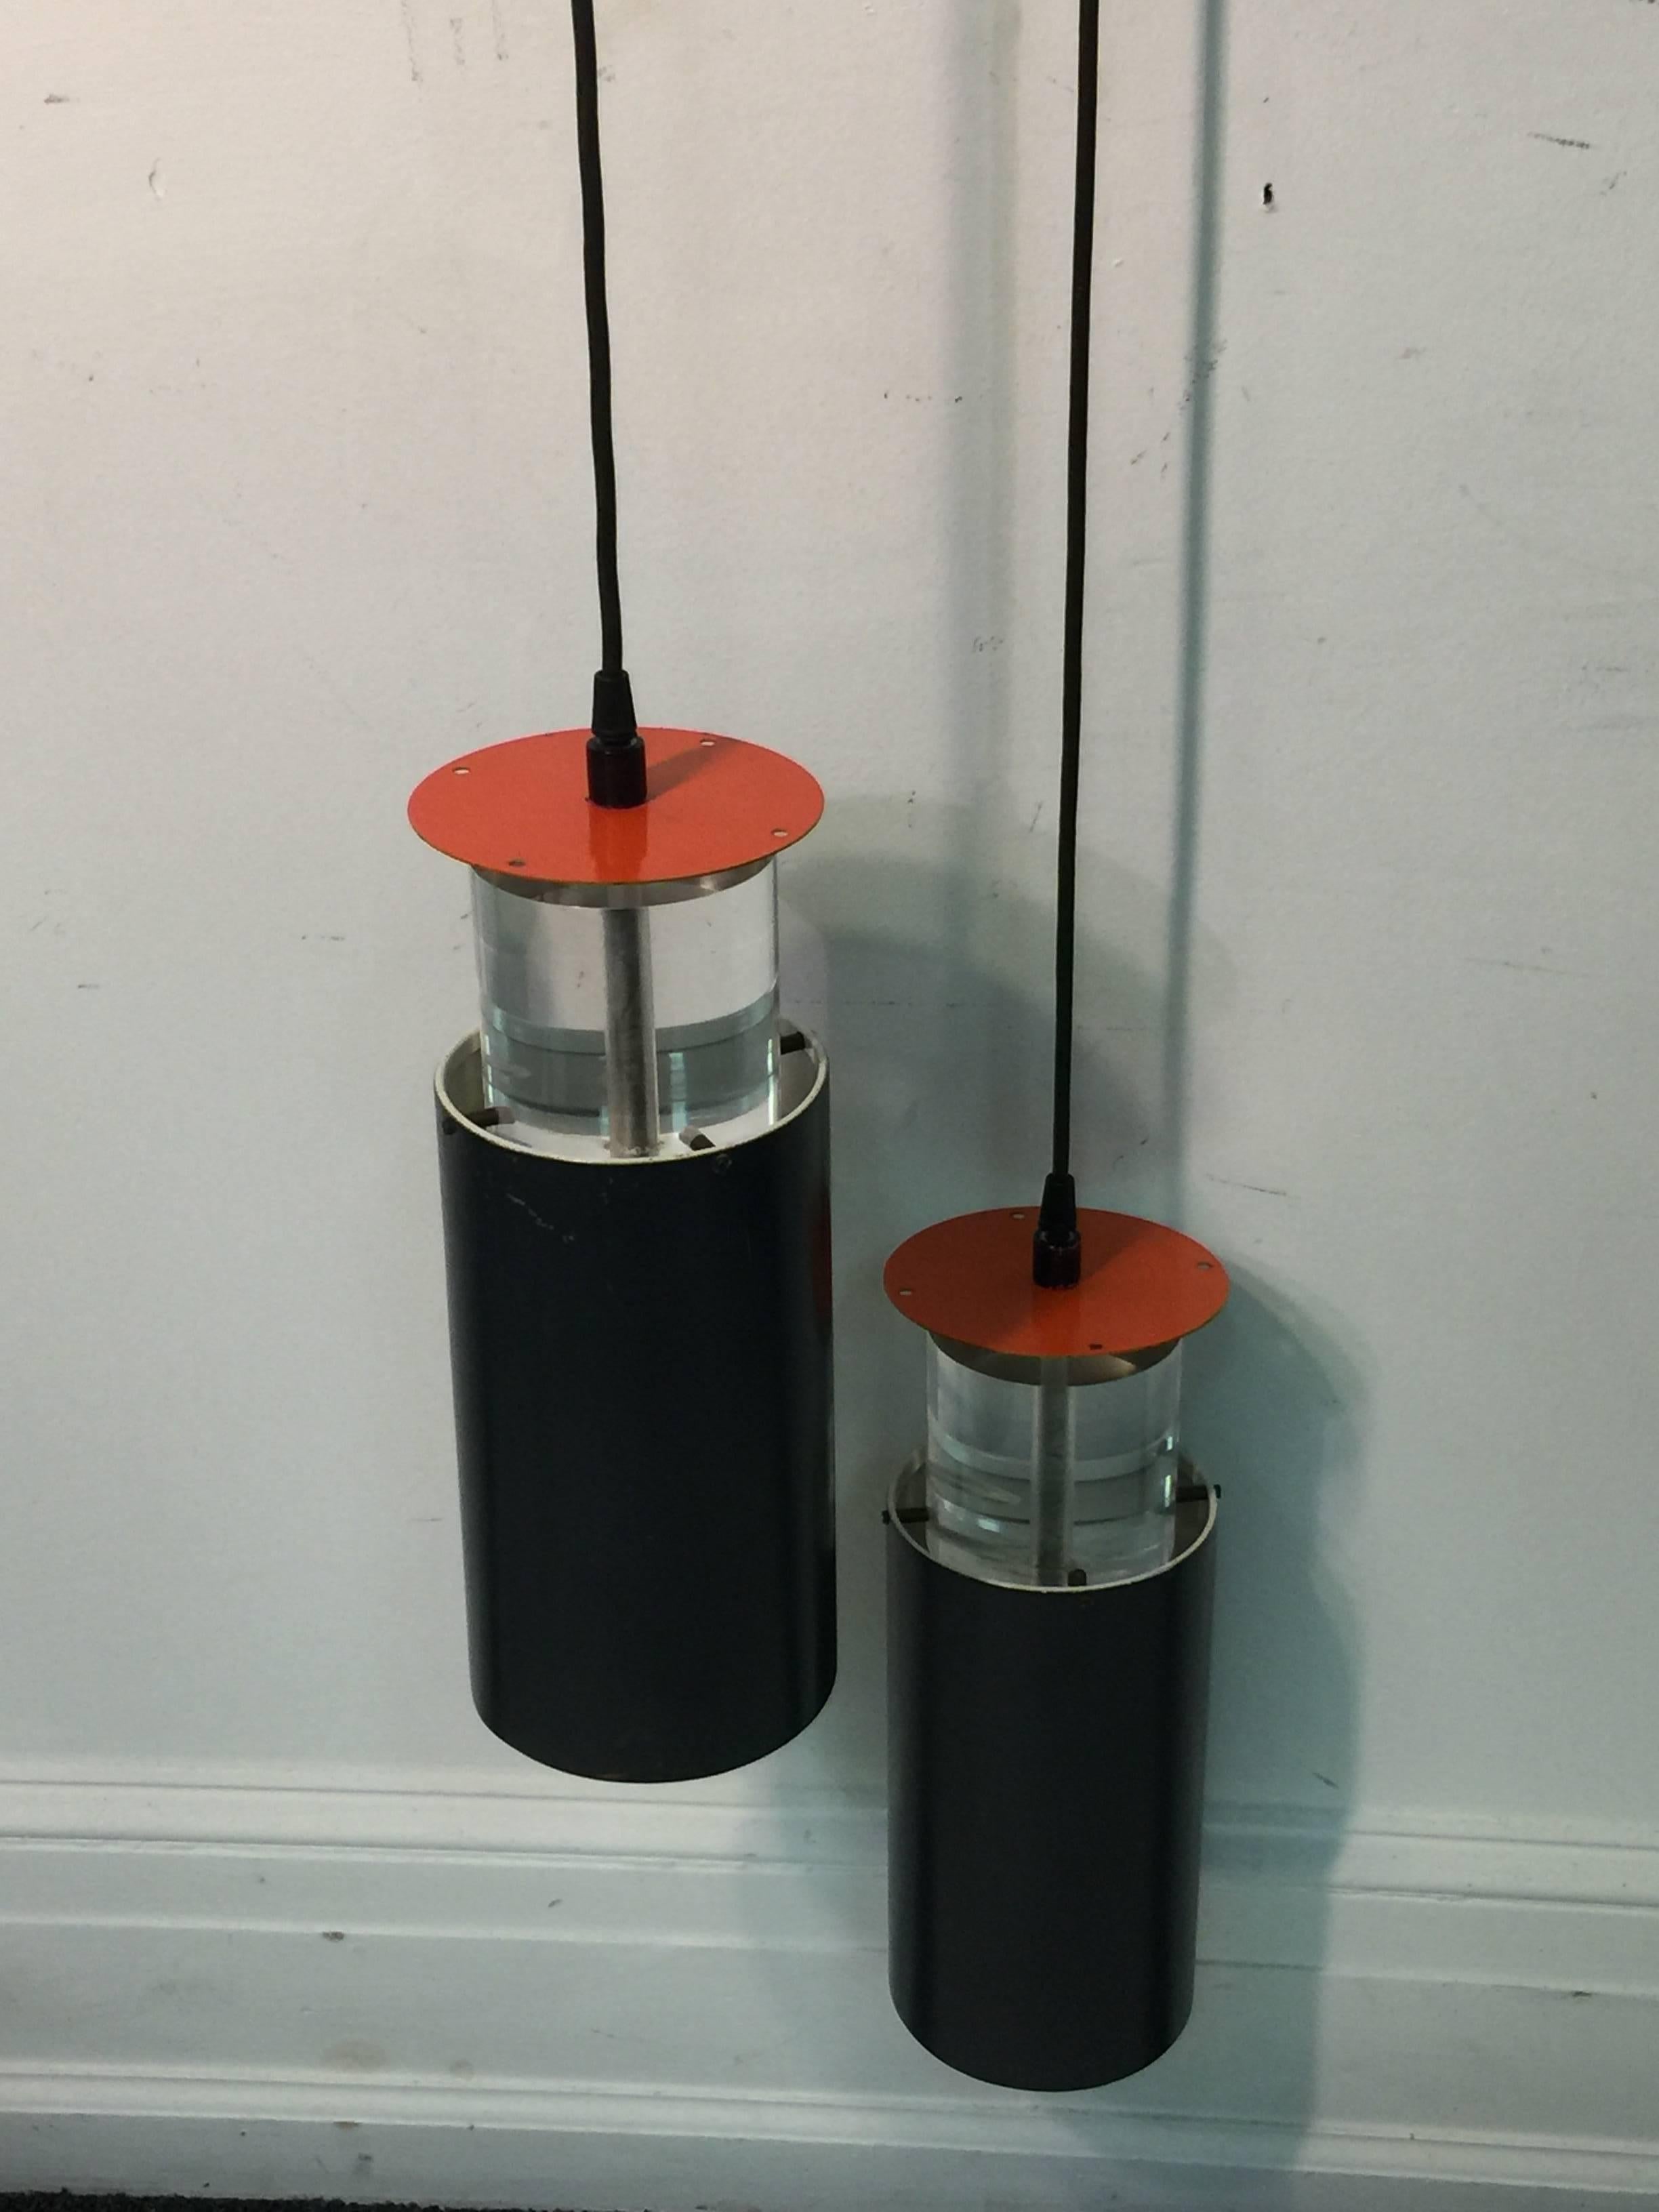 Poul Henningsen double pendant fixture with two hanging cylindrical fixtures in black enameled brass with a Pop Art orange enameled disc on top. The interior of the cylinder is Pop Art orange also. The clear thick Lucite cylinder is at the top of